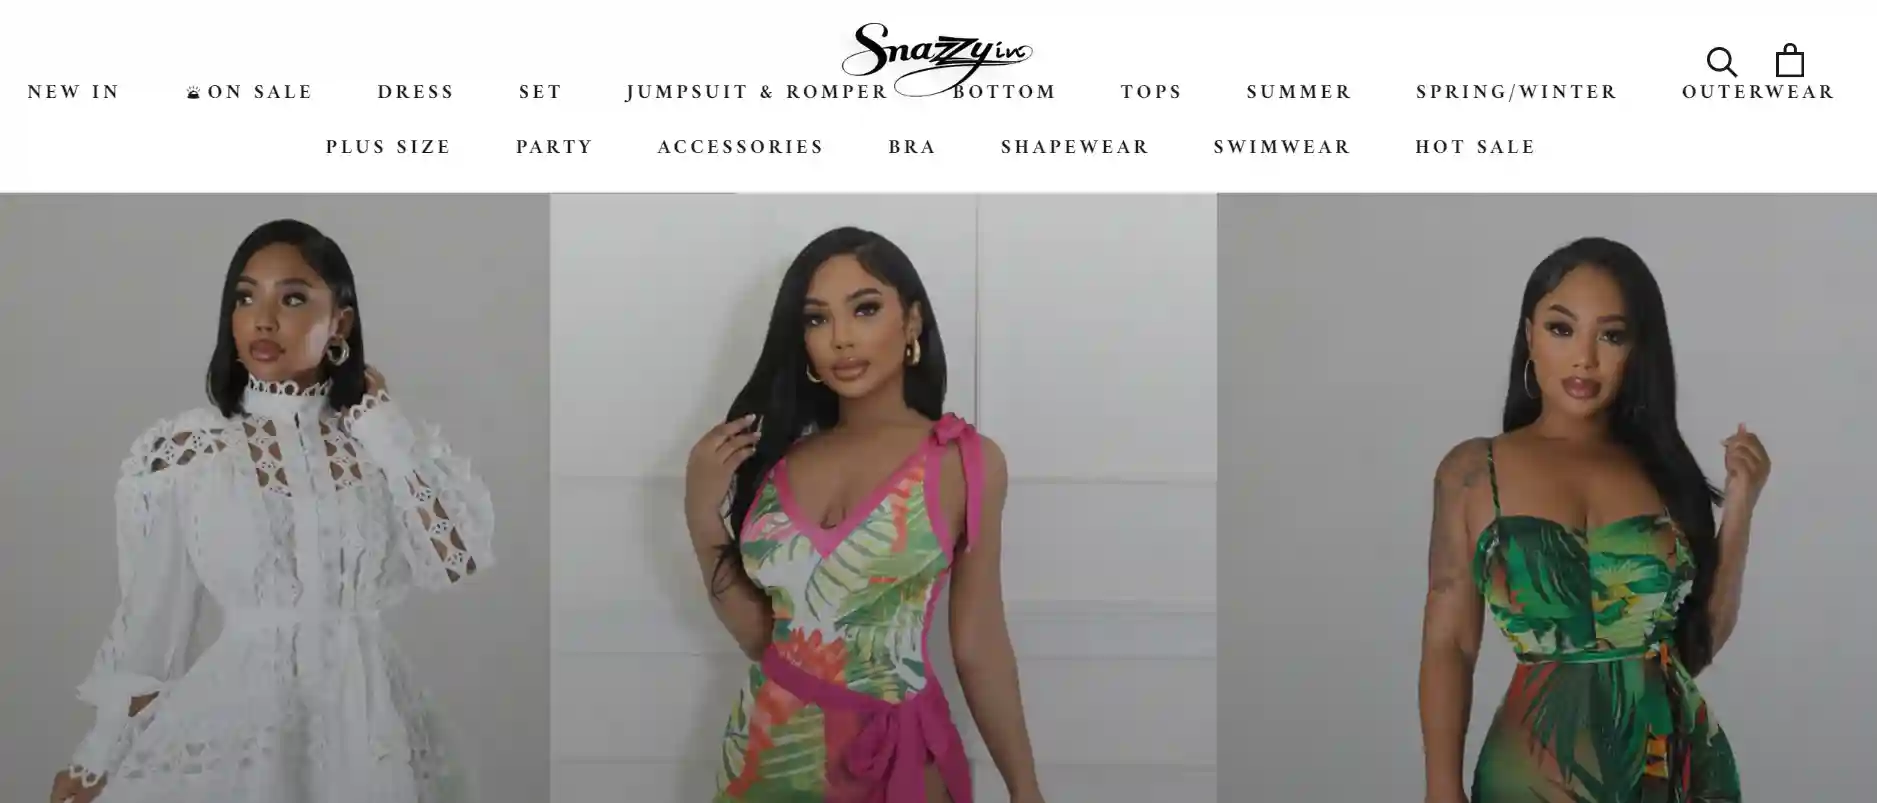 You are currently viewing Snazzyin Clothing Reviews: A Legit Brand or Just Another Scam?